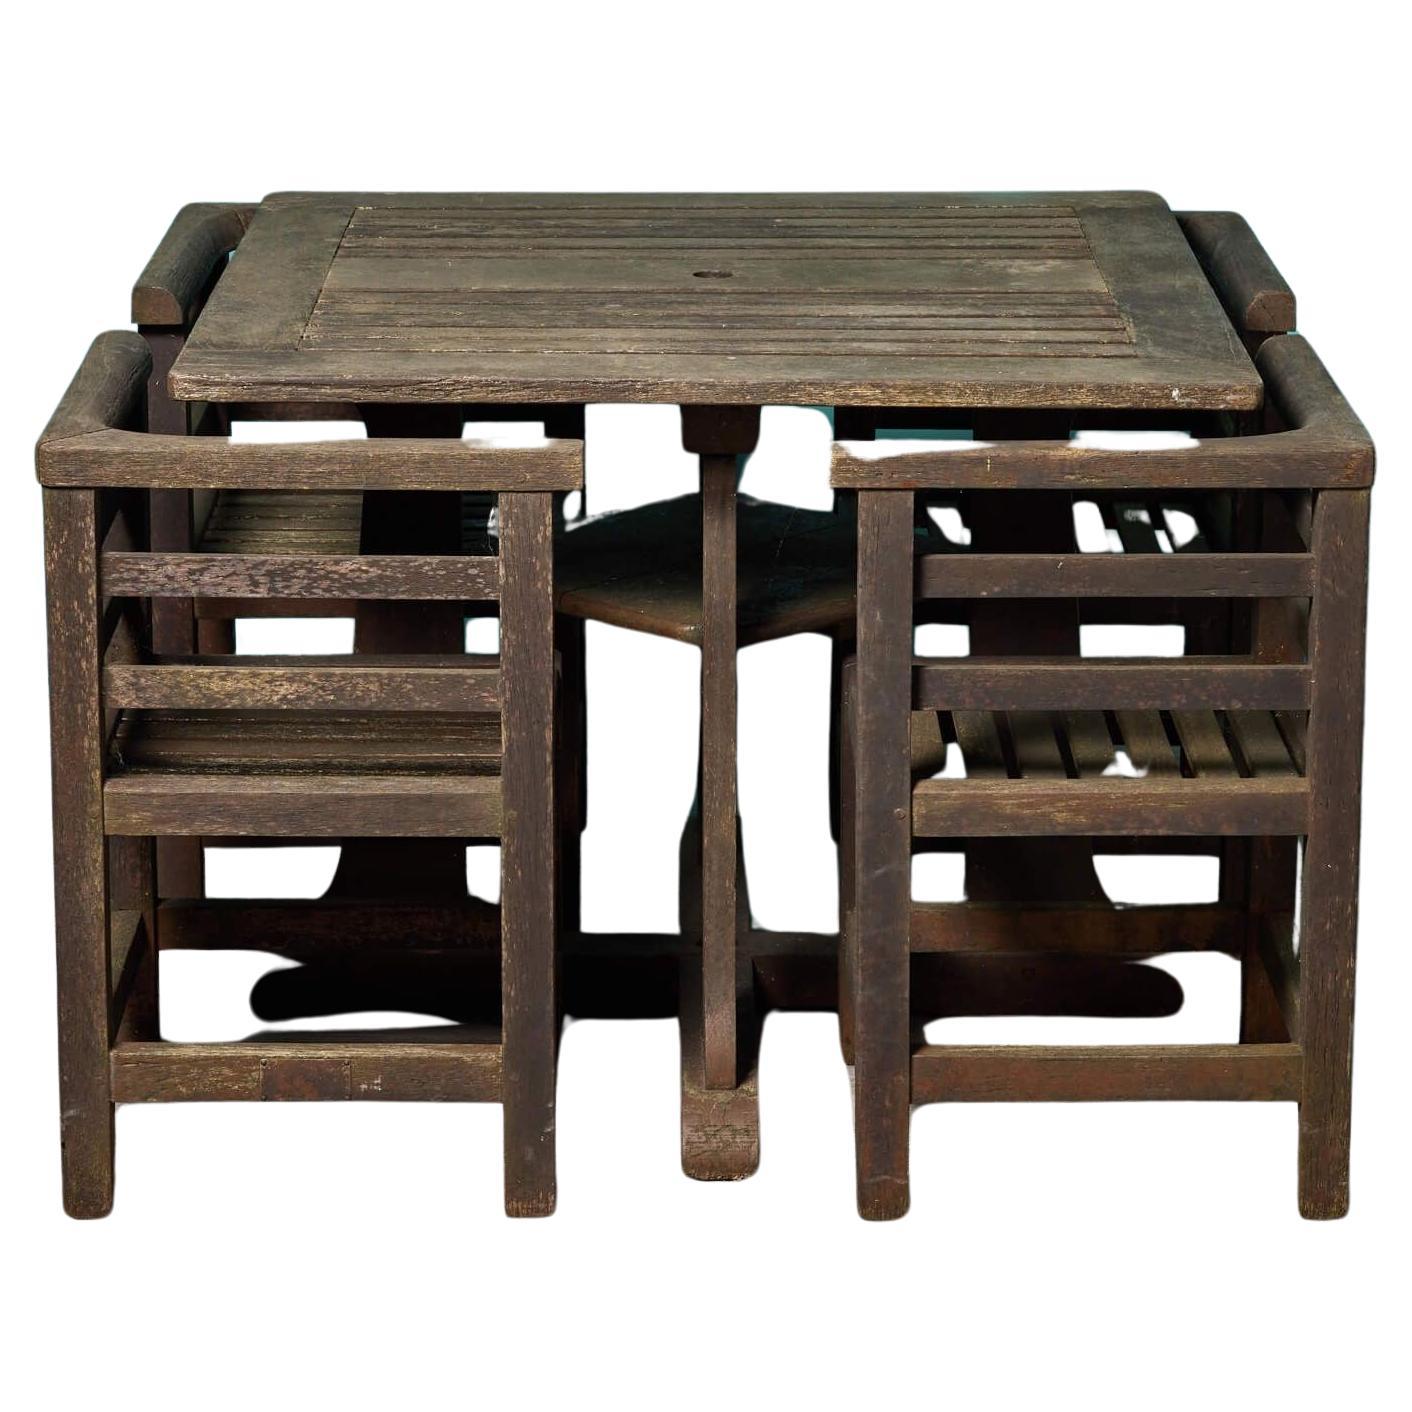 Early 20th Century Compact Garden Table and Chairs